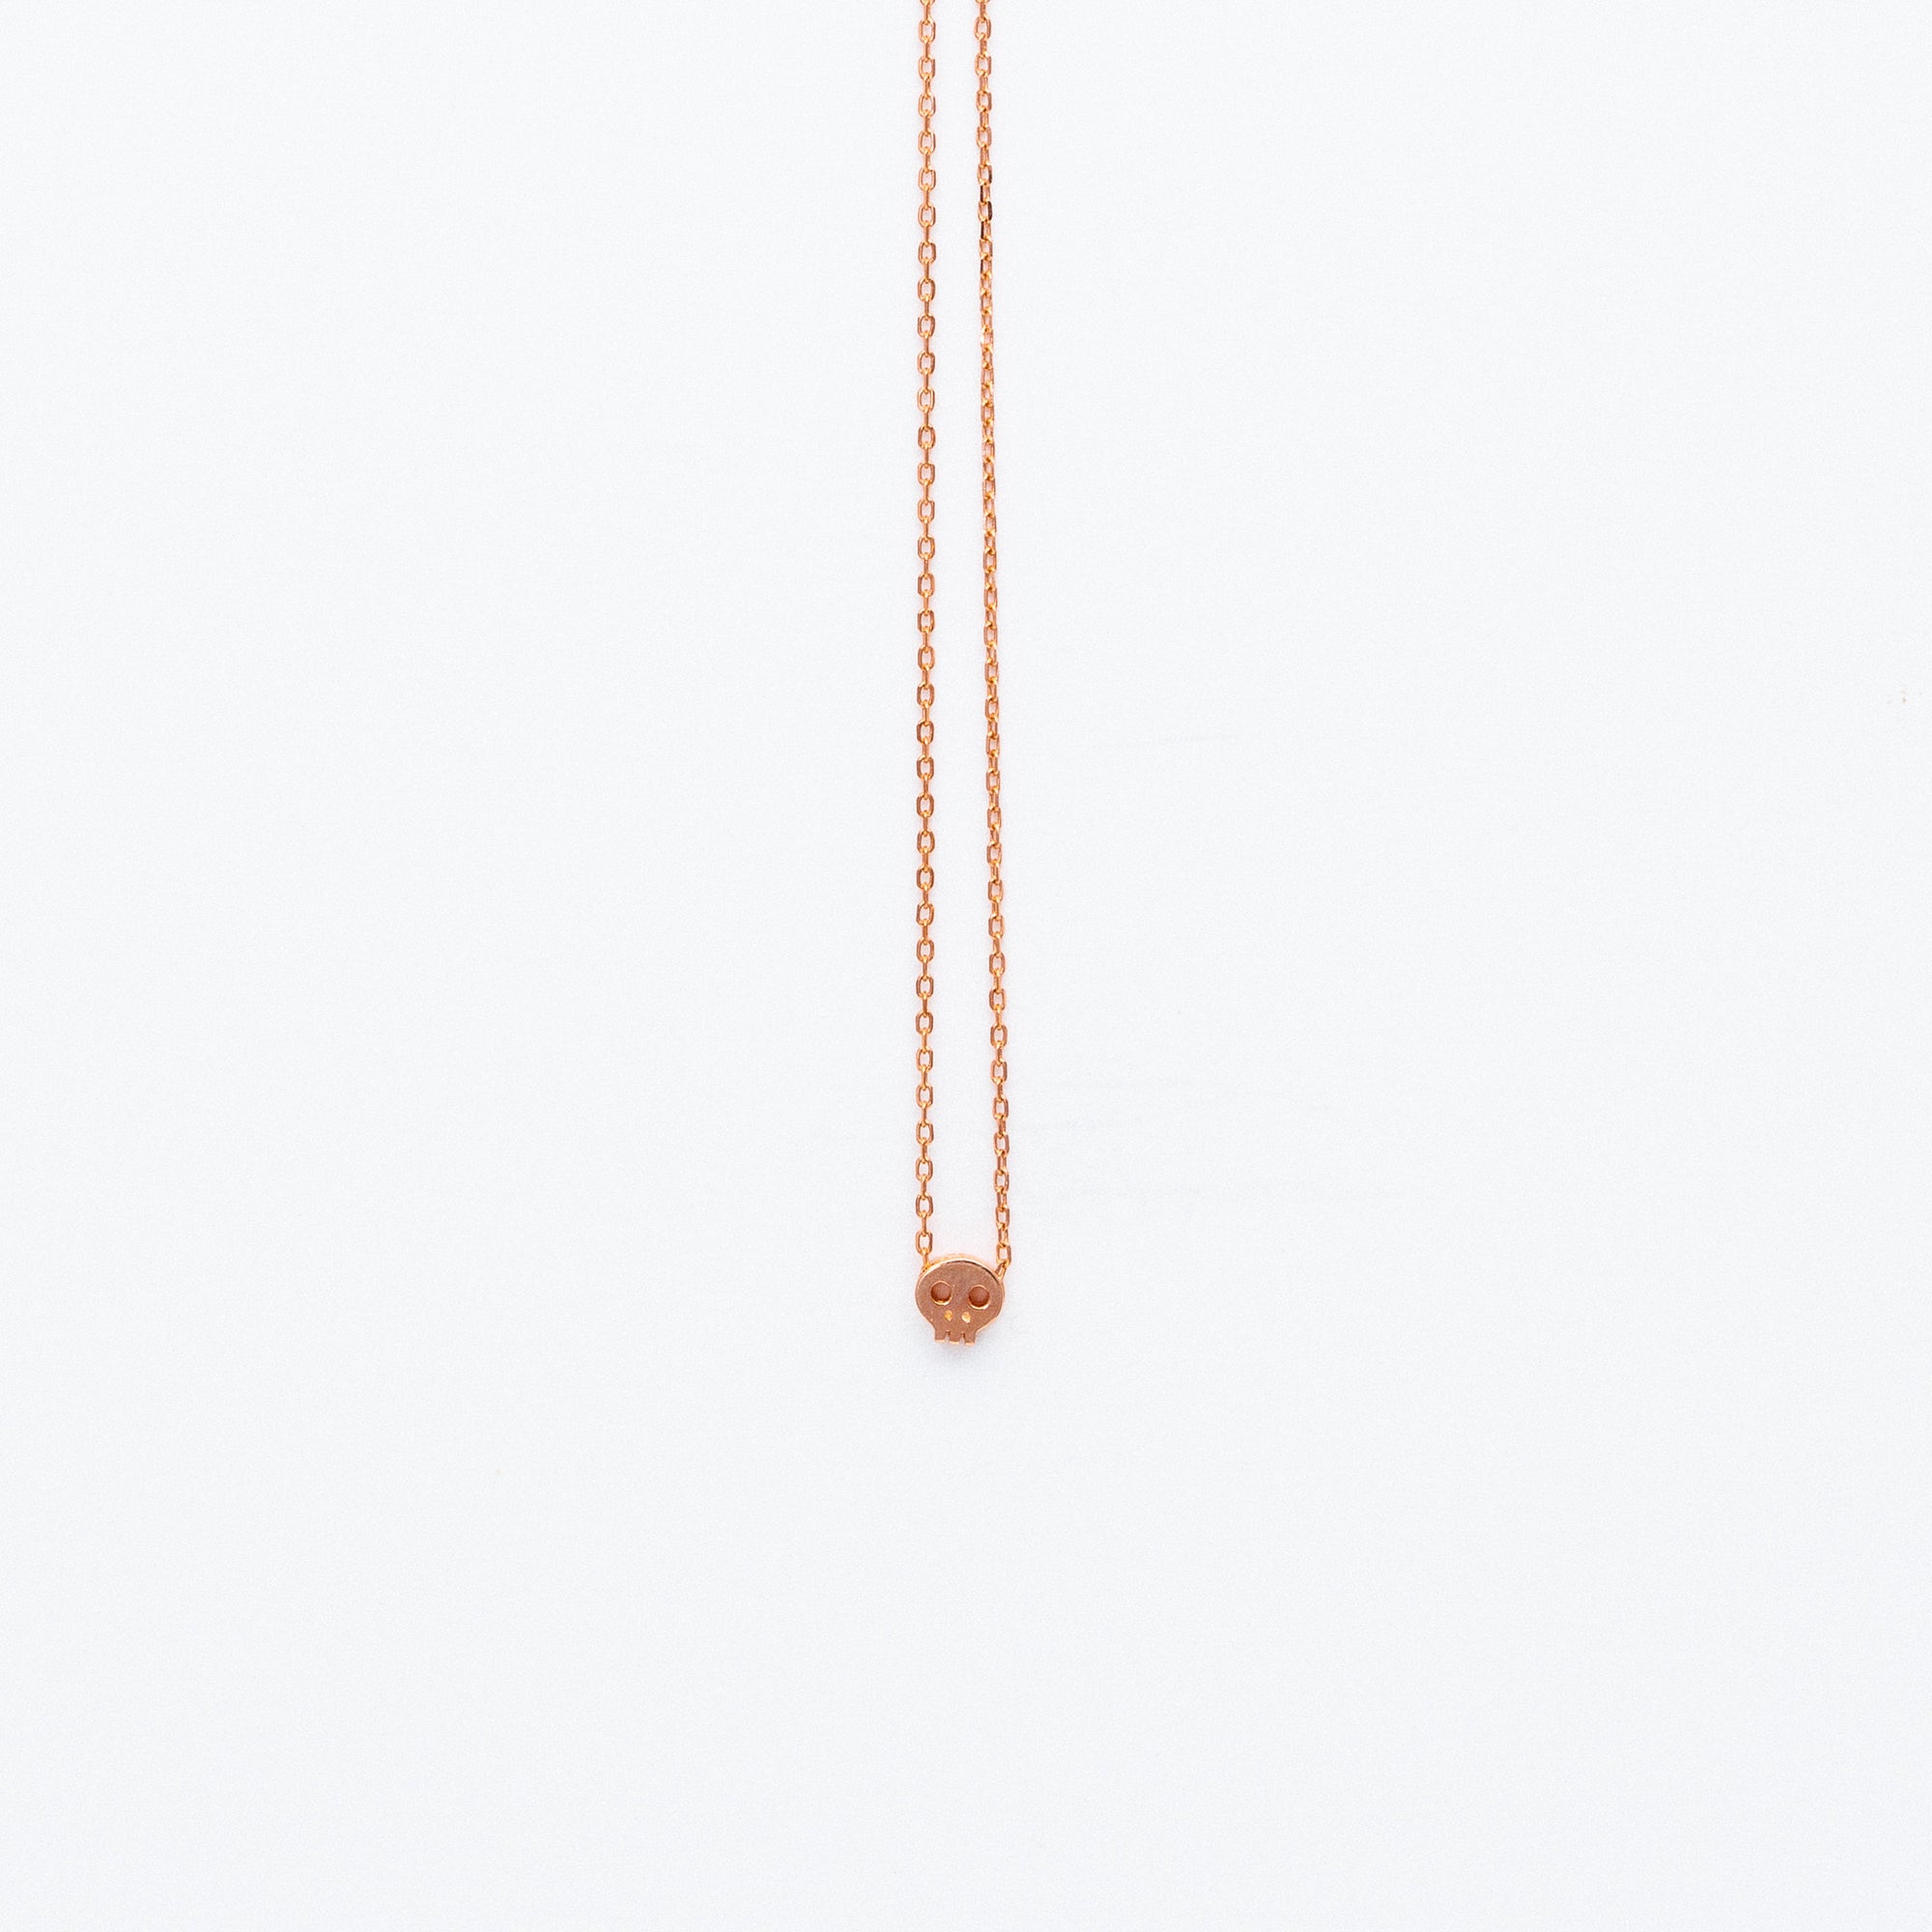 NSC - Tiny Skull Necklace in Gold Plated